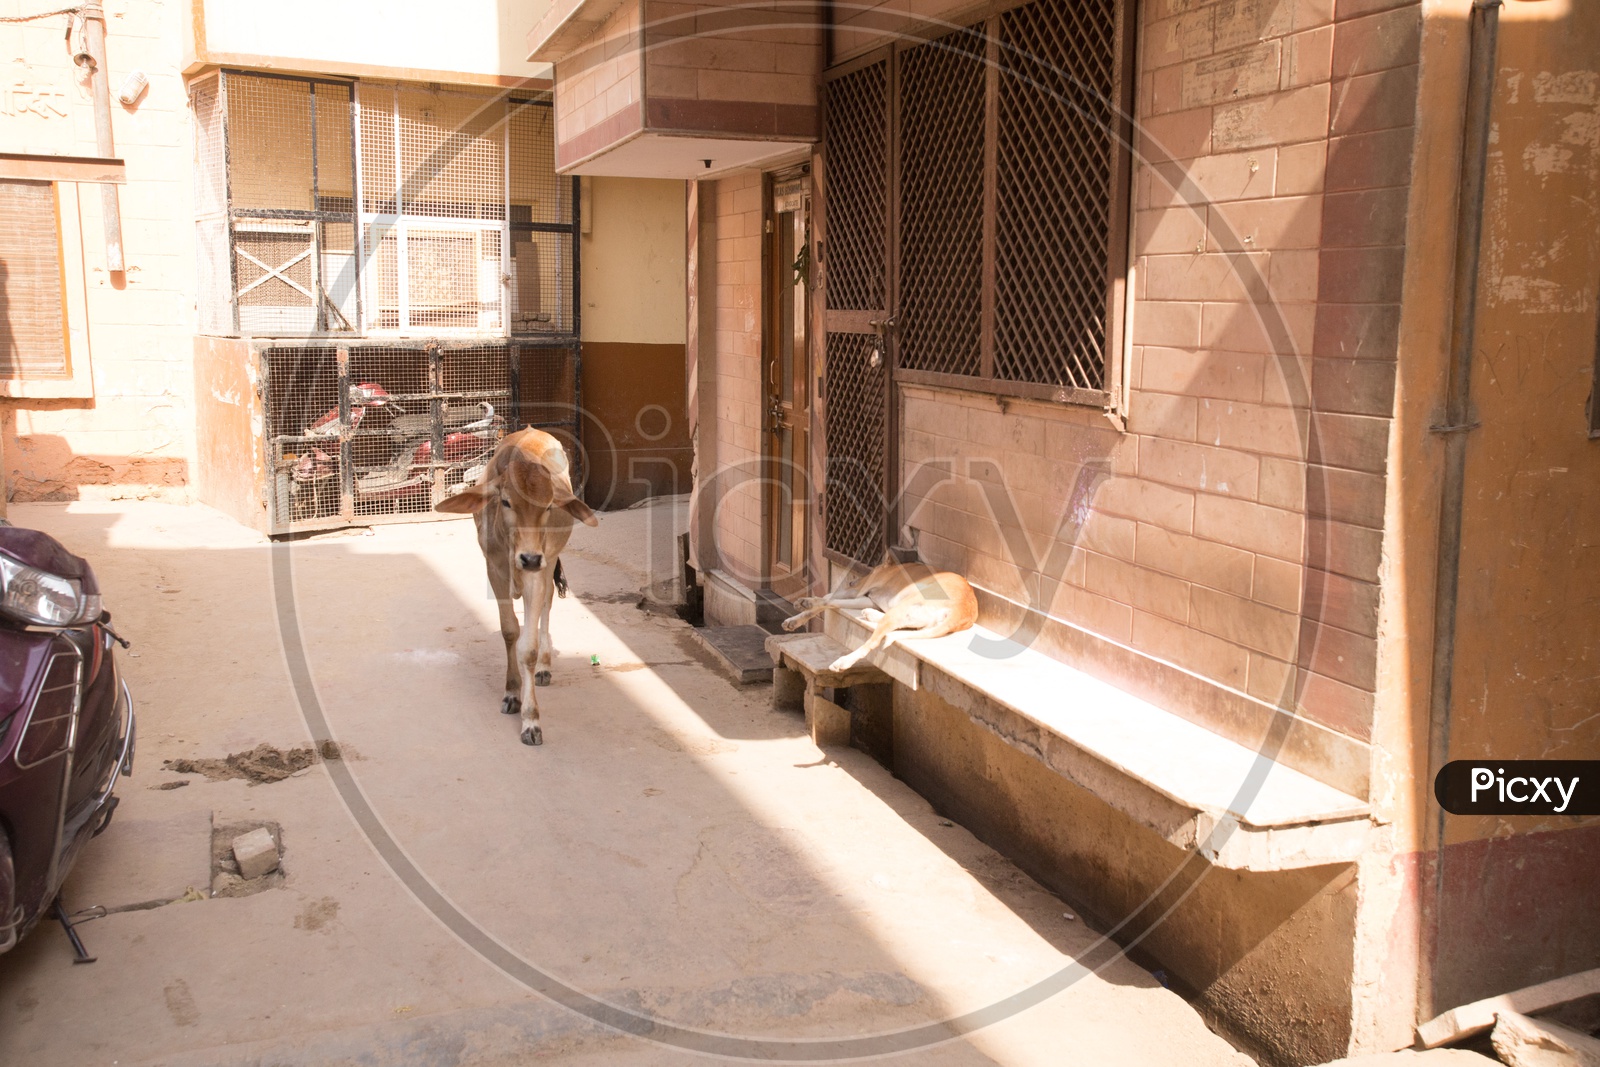 A cow in the streets of Nandgaon